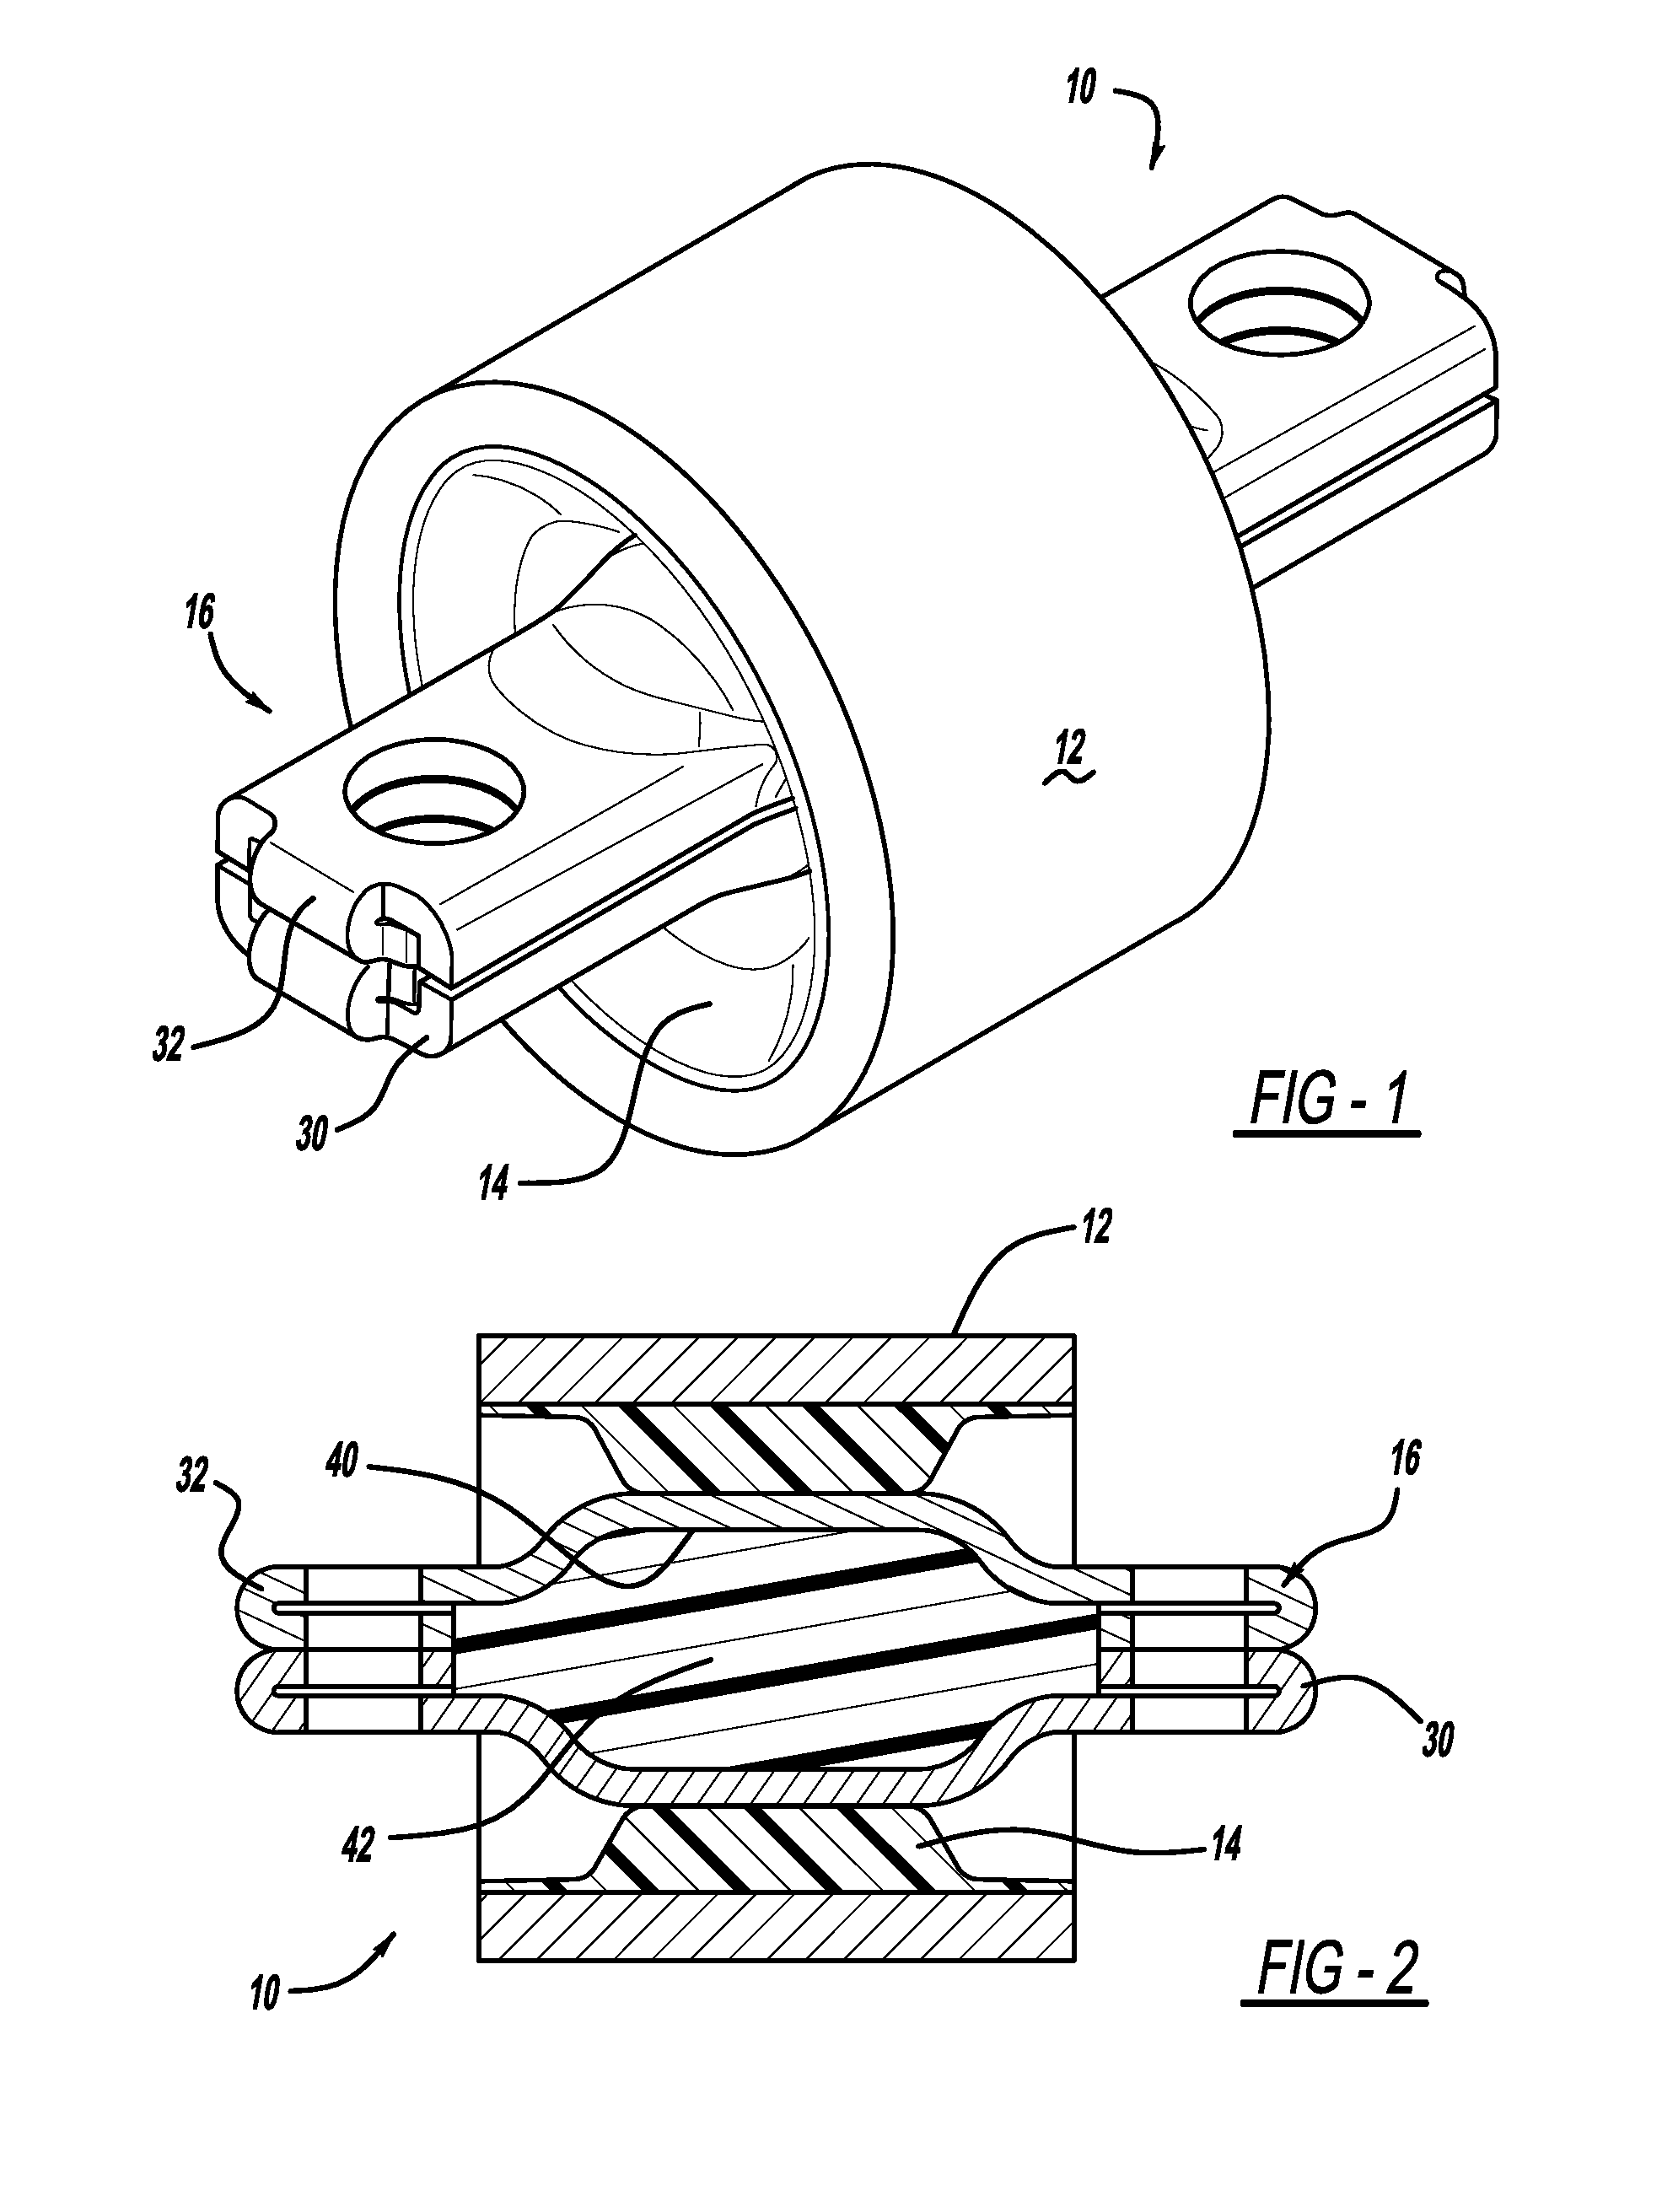 Elastomeric bushing assembly with multi-piece bar pin